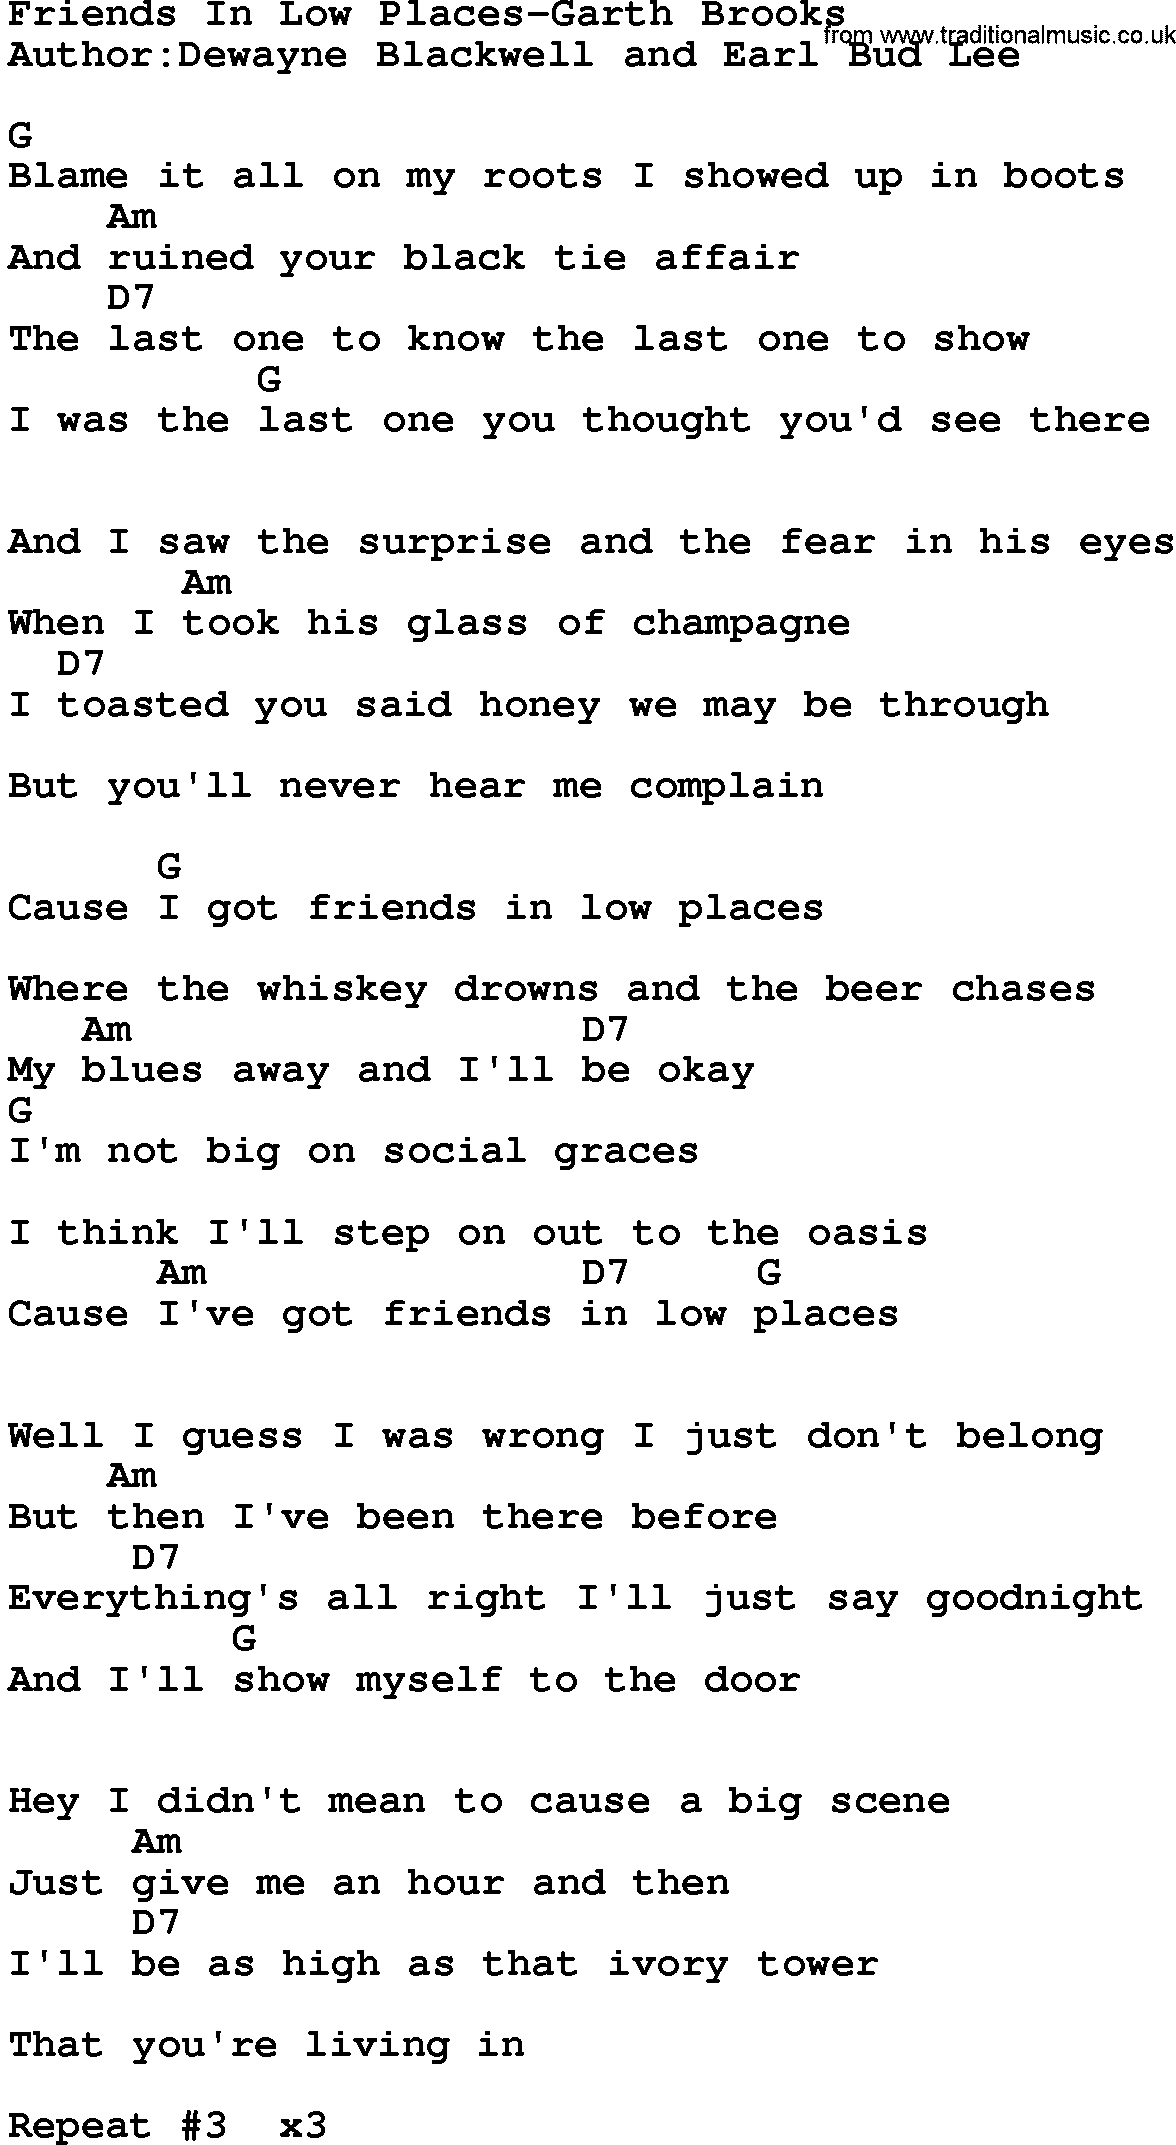 Country music song: Friends In Low Places-Garth Brooks lyrics and chords